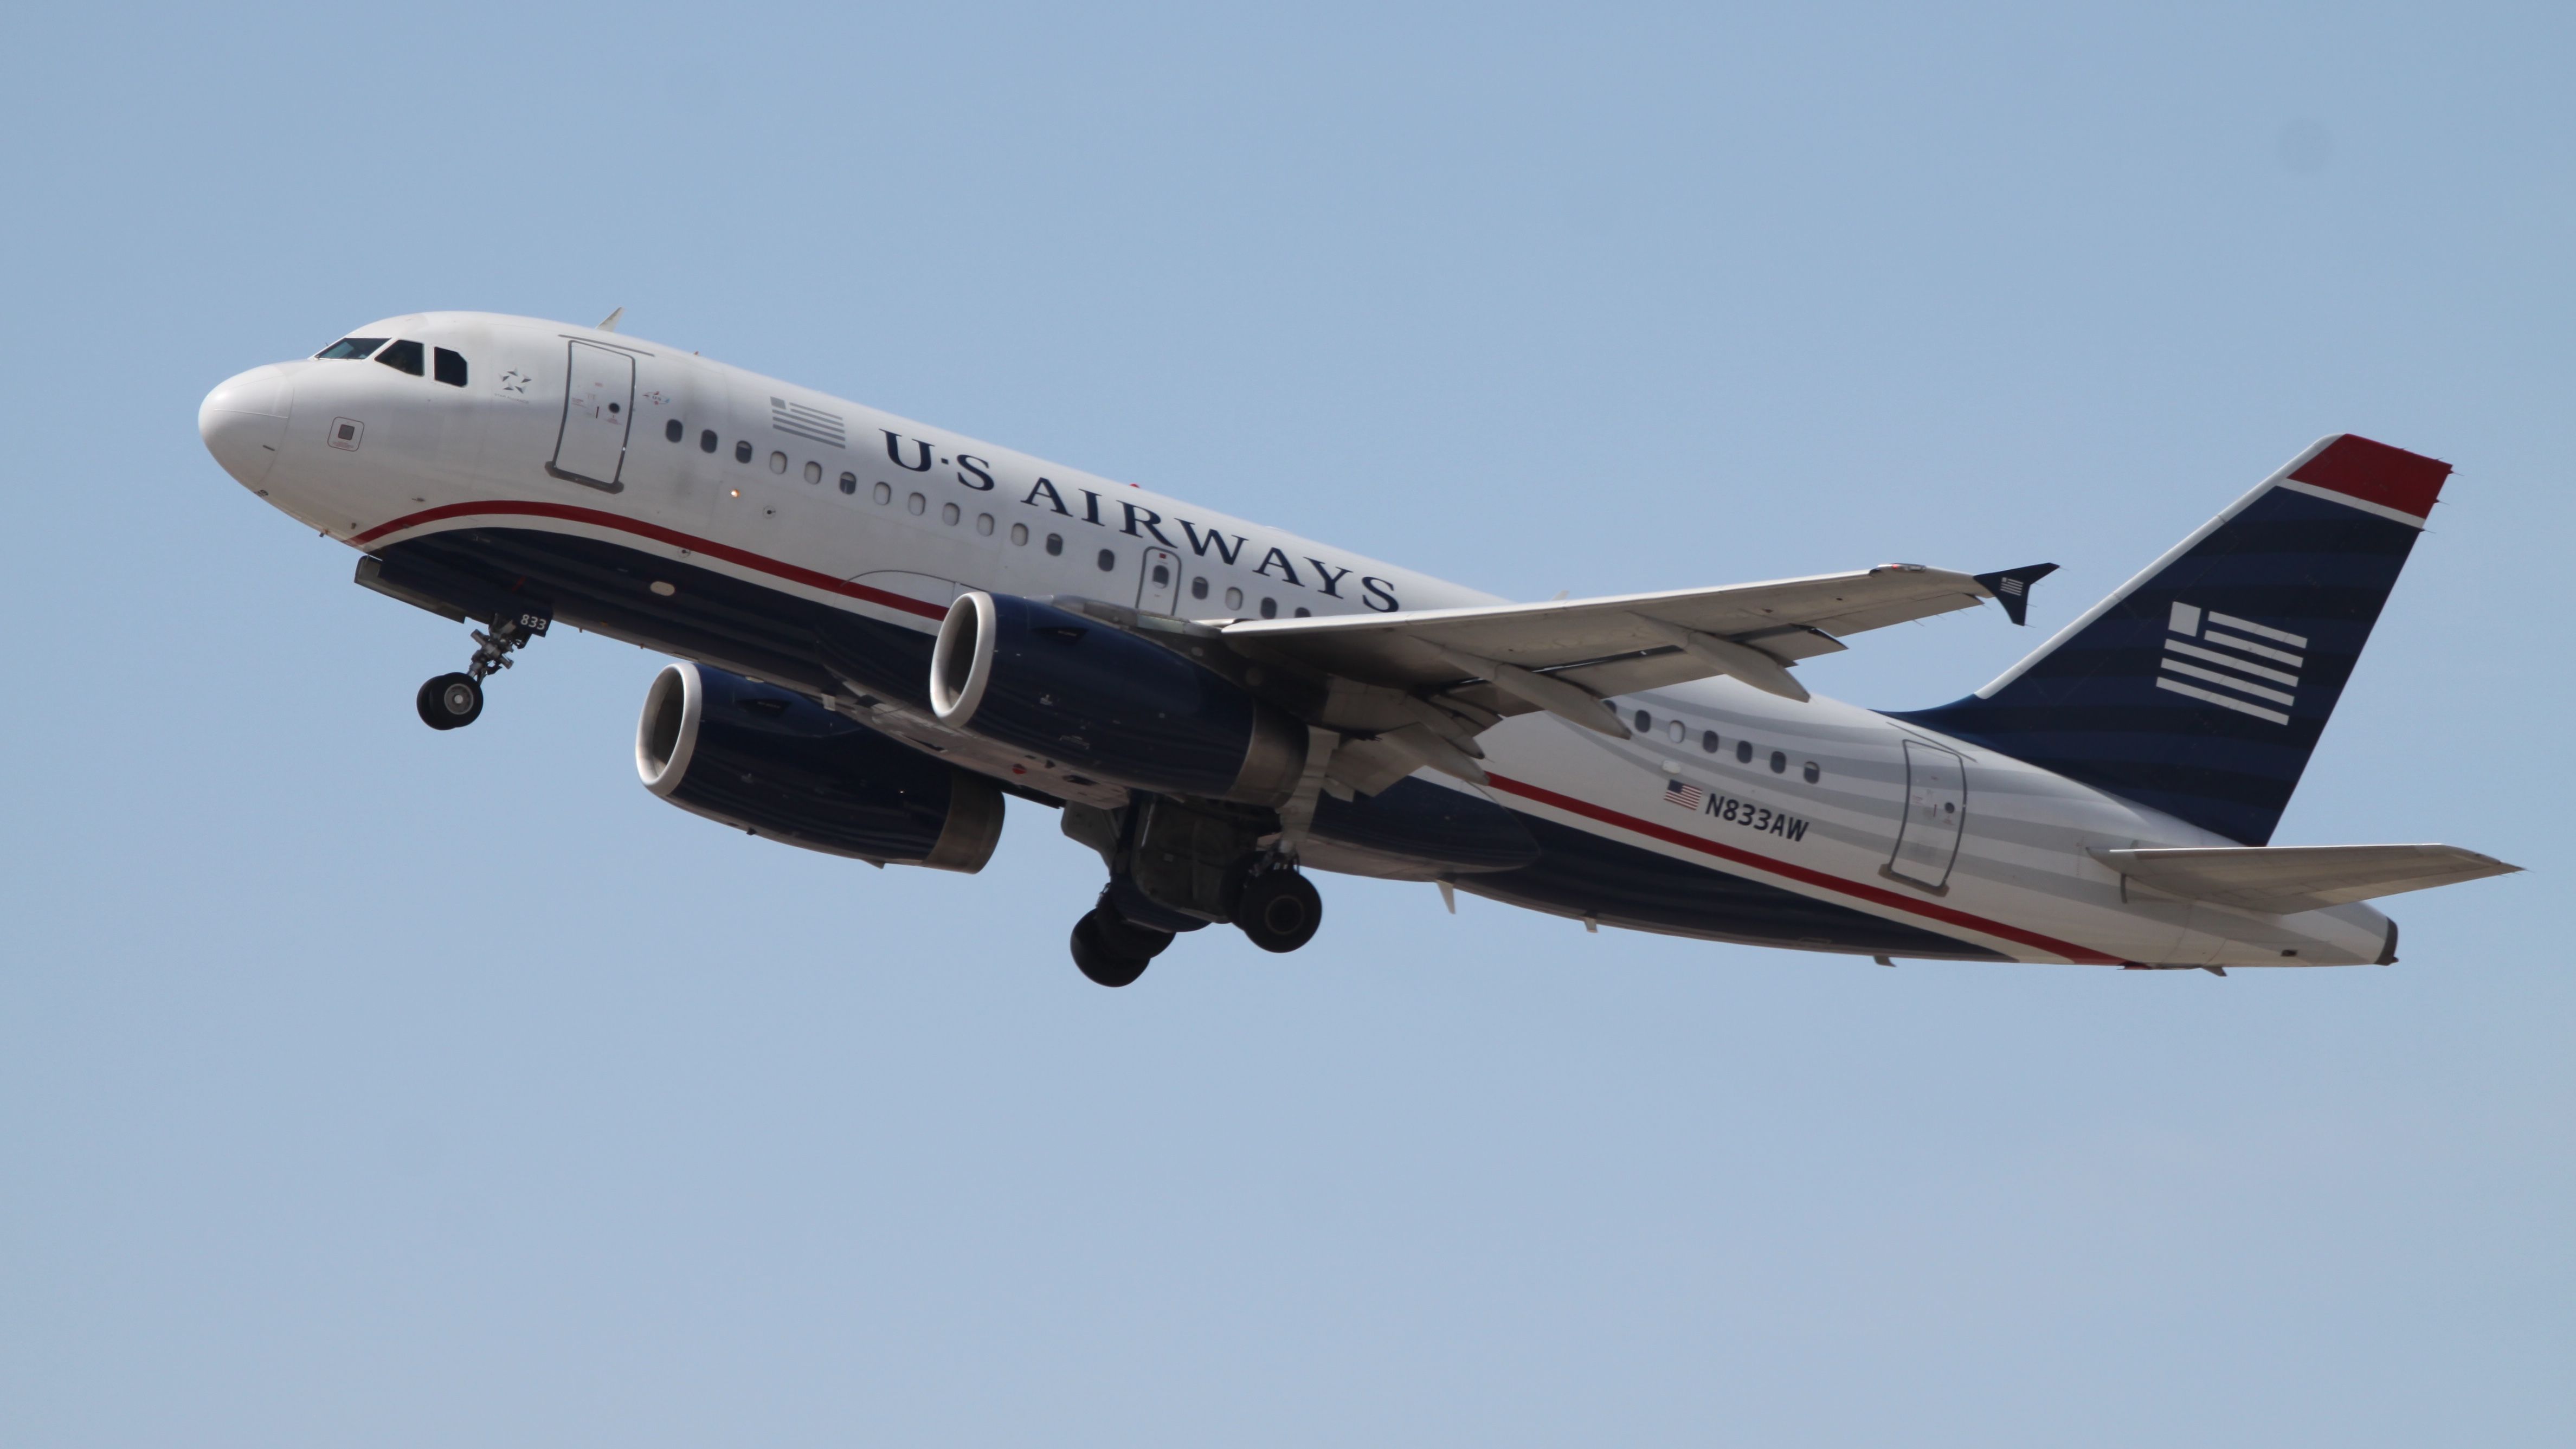 White Airbus passenger jetliner with US Airways livery flying in blue sky